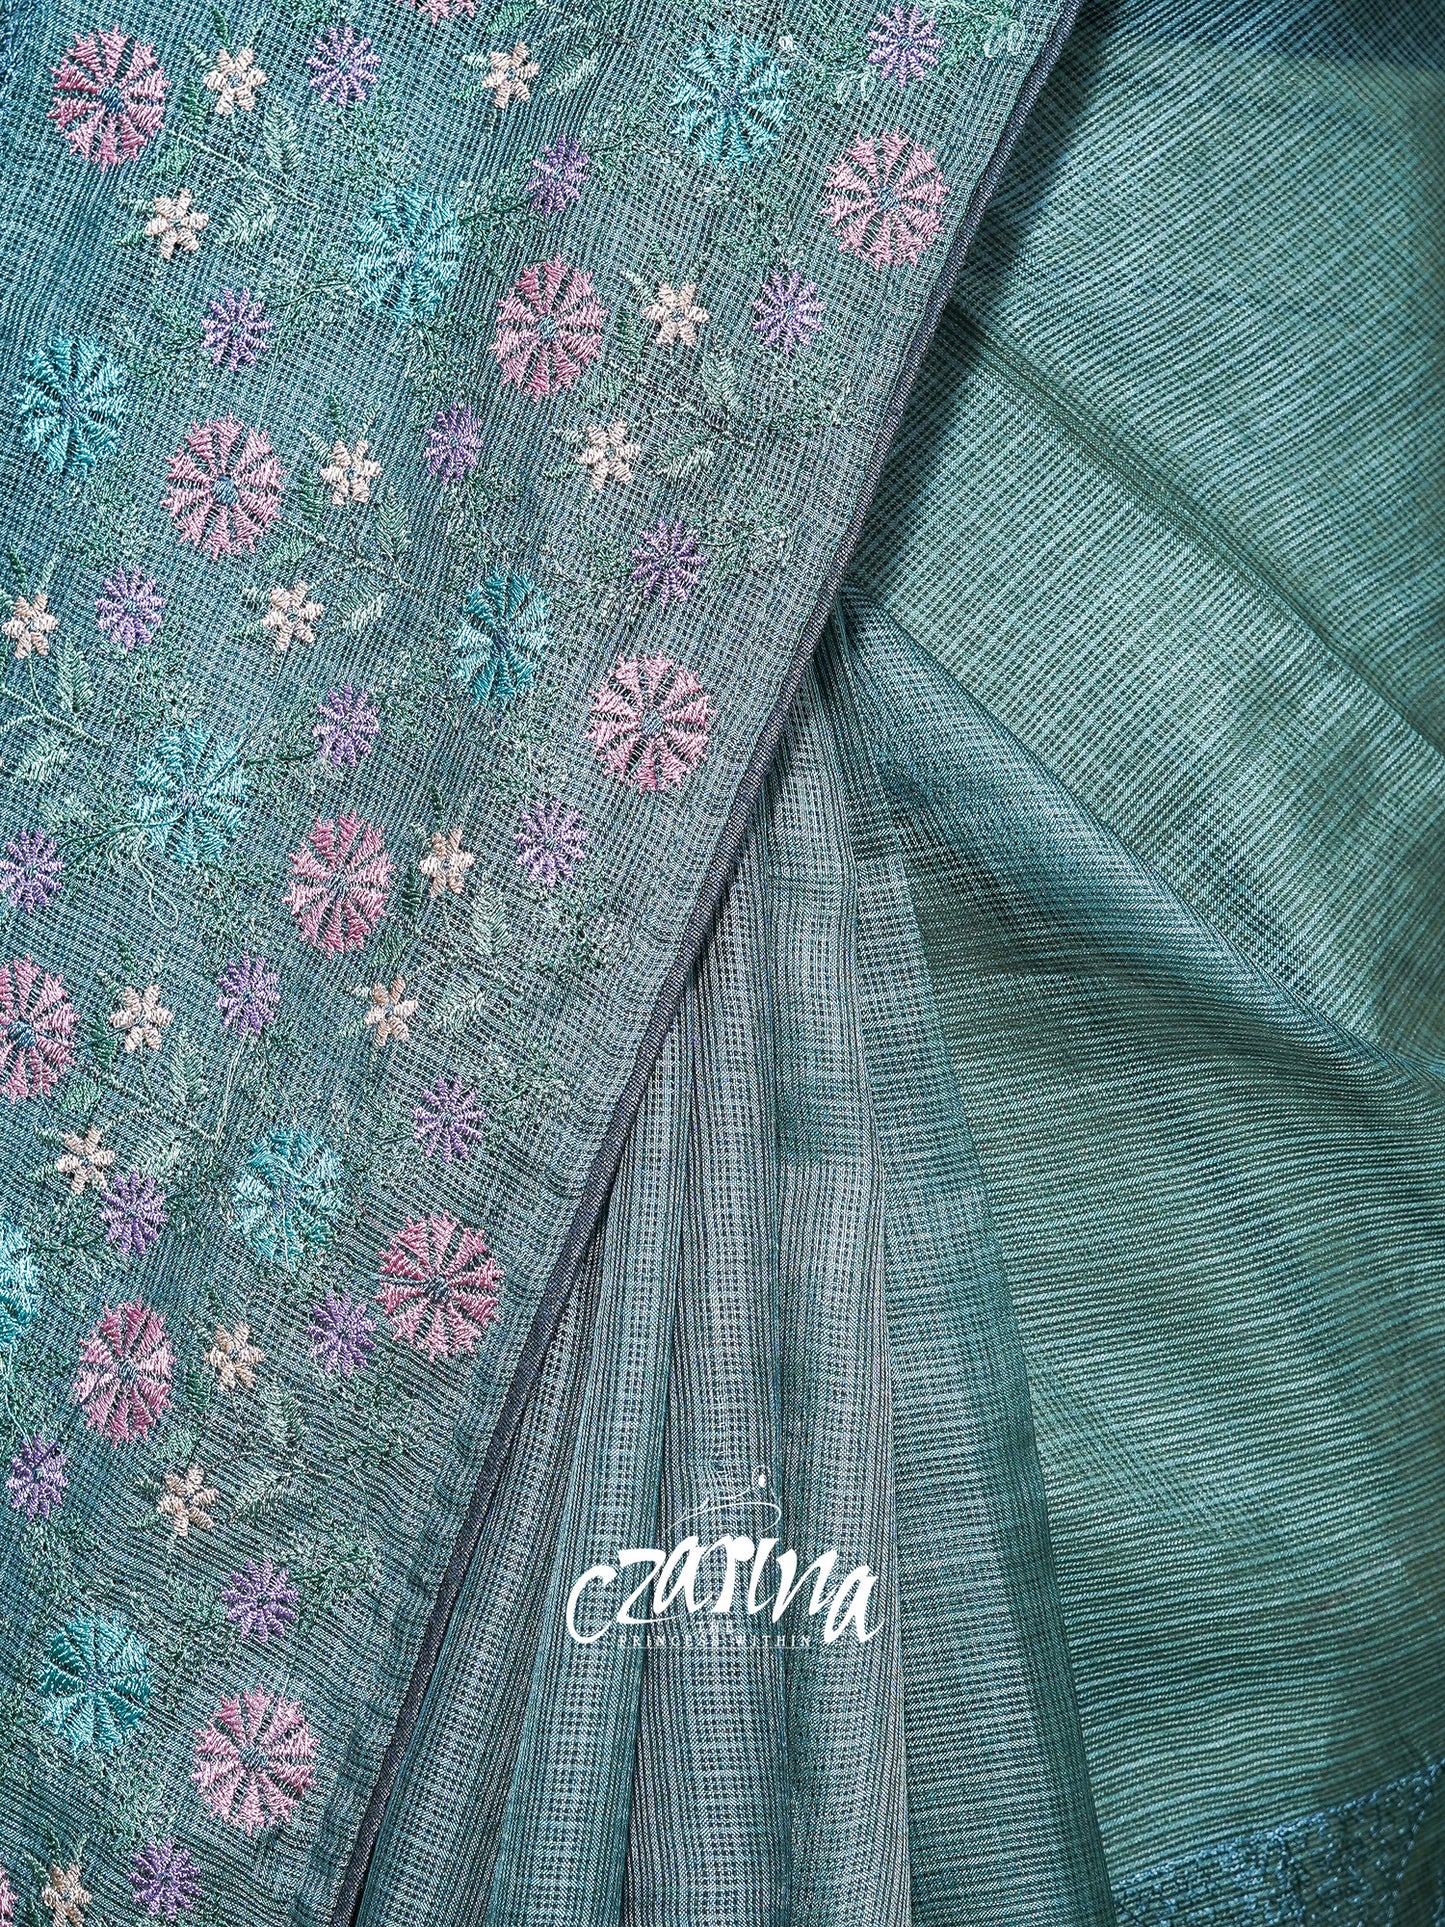 SILVER GREY WITH FINE THREAD EMBROIDERY IN SHADES OF PINK AND GREY SILK KOTA SAREE